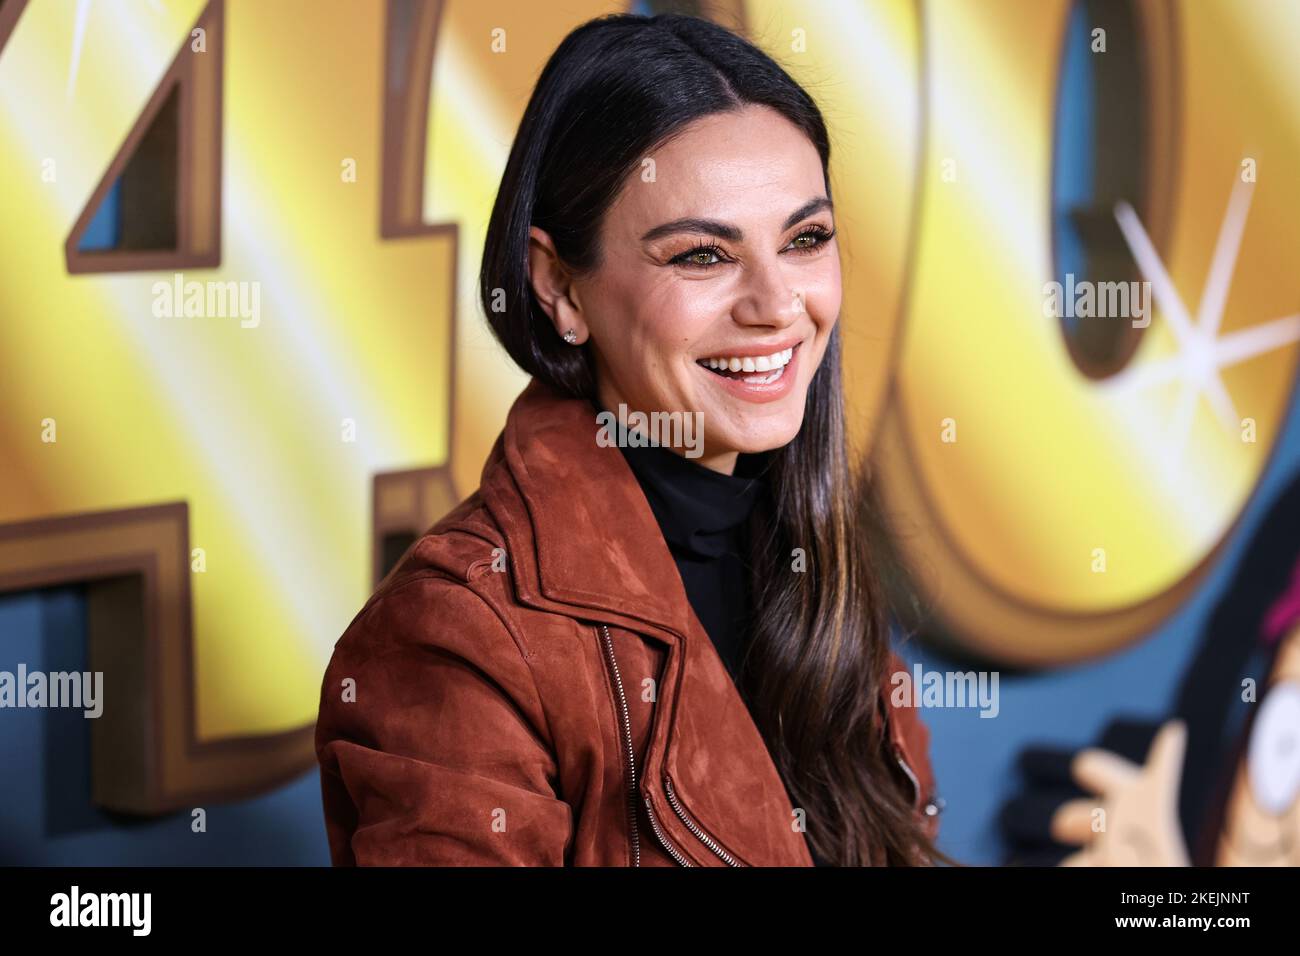 Los Angeles, United States. 12th Nov, 2022. LOS ANGELES, CALIFORNIA, USA - NOVEMBER 12: American actress Mila Kunis arrives at FOX's 'Family Guy' 400th Episode Celebration held at the Fox Studio Lot on November 12, 2022 in Los Angeles, California, United States. (Photo by Xavier Collin/Image Press Agency) Credit: Image Press Agency/Alamy Live News Stock Photo